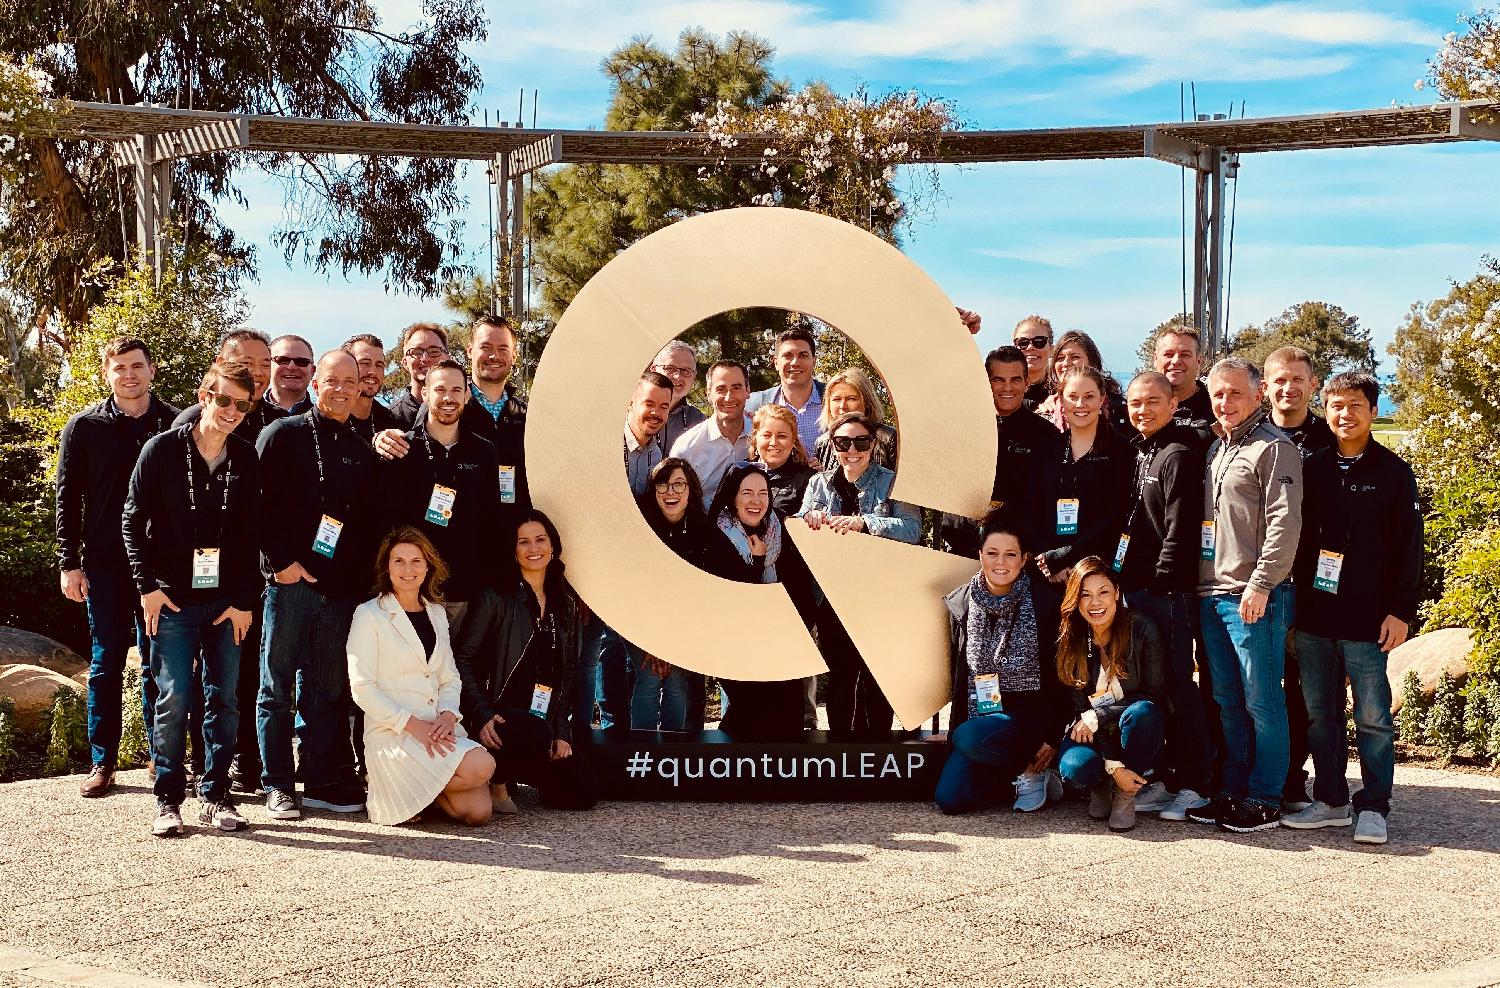 The Quantum Metric team celebrates at their yearly Quantum LEAP user conference in February 2020